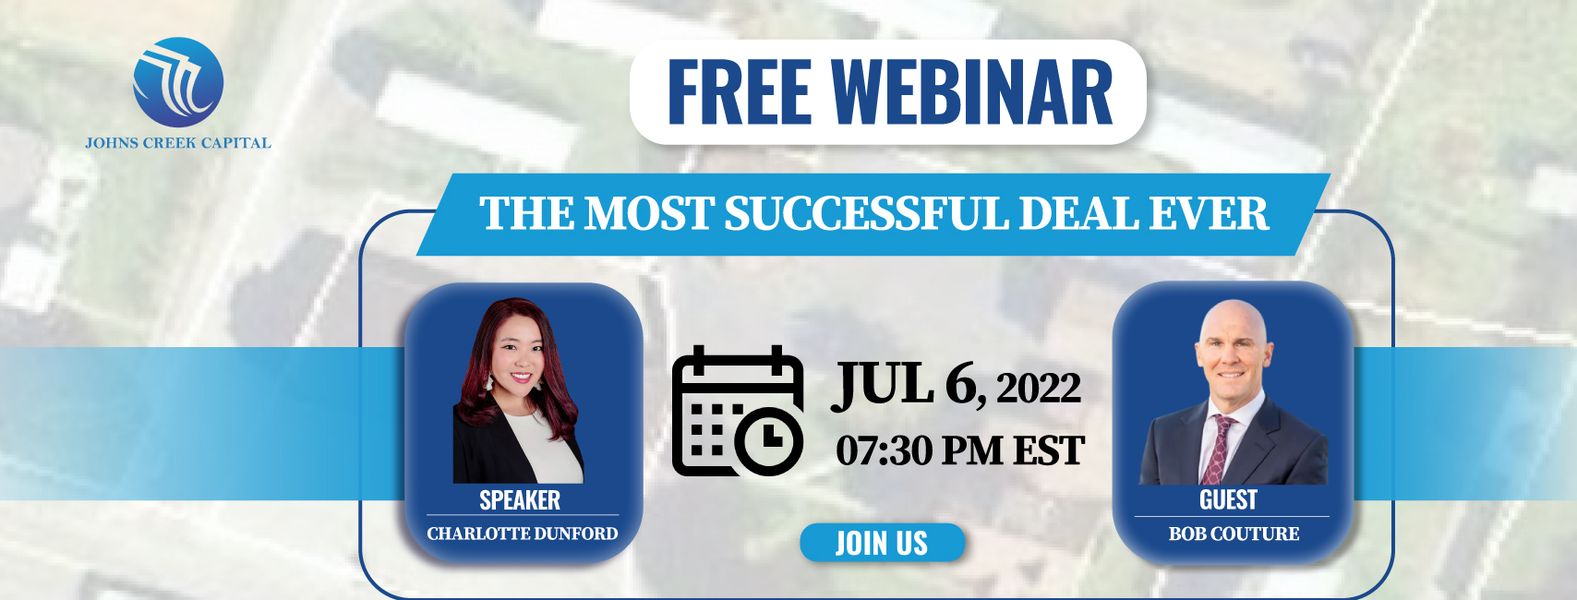 The Most Successful Deal Ever, Online Event